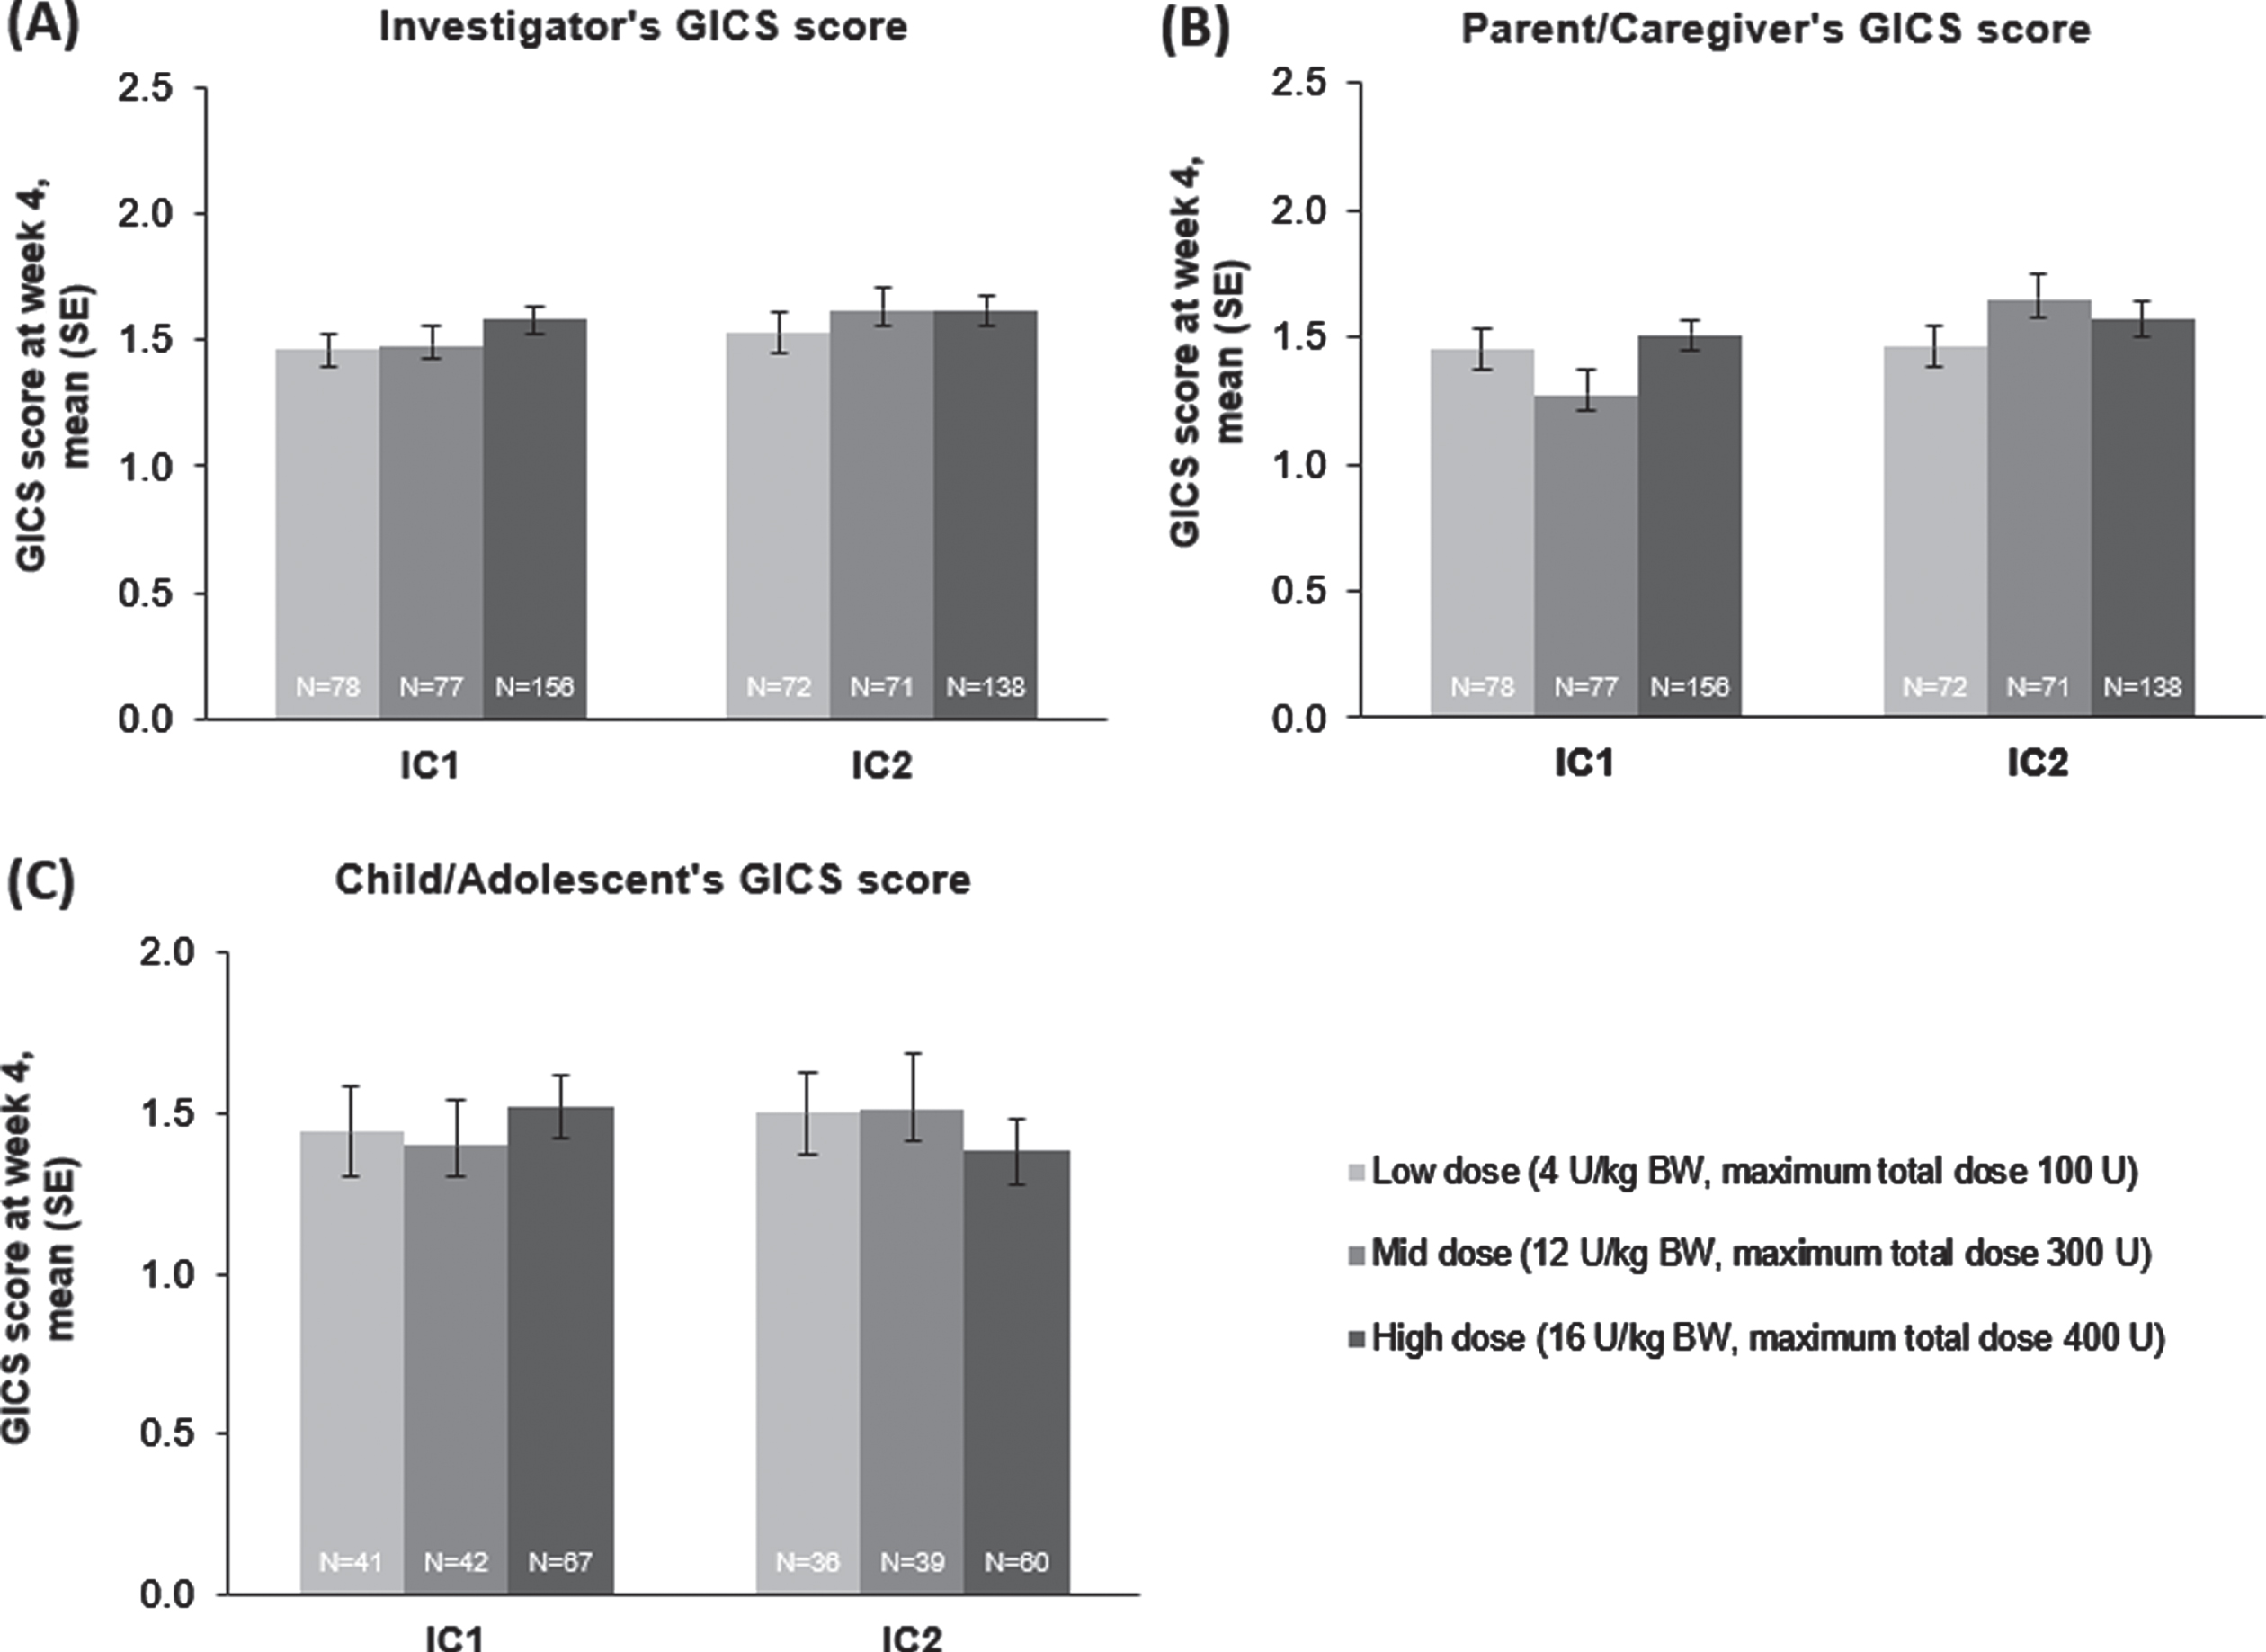 The effect of incobotulinumtoxinA on (A) investigator, (B) parent/caregiver, and (C) child/adolescent GICS scores†at week 4, FAS, OC. †GICS scores were available from 150 of 311 and 135 of 287 children/adolescents (48% and 47.0%) at IC1 and IC2. The proportion of children/adolescents responding was attributed to the respondents’ young age or their cognitive abilities. BW = body weight; FAS = full analysis set; GICS = Global Impression of Change Scale; IC = injection cycle; kg = kilogram; OC = observed cases; SE = standard error; U = unit.